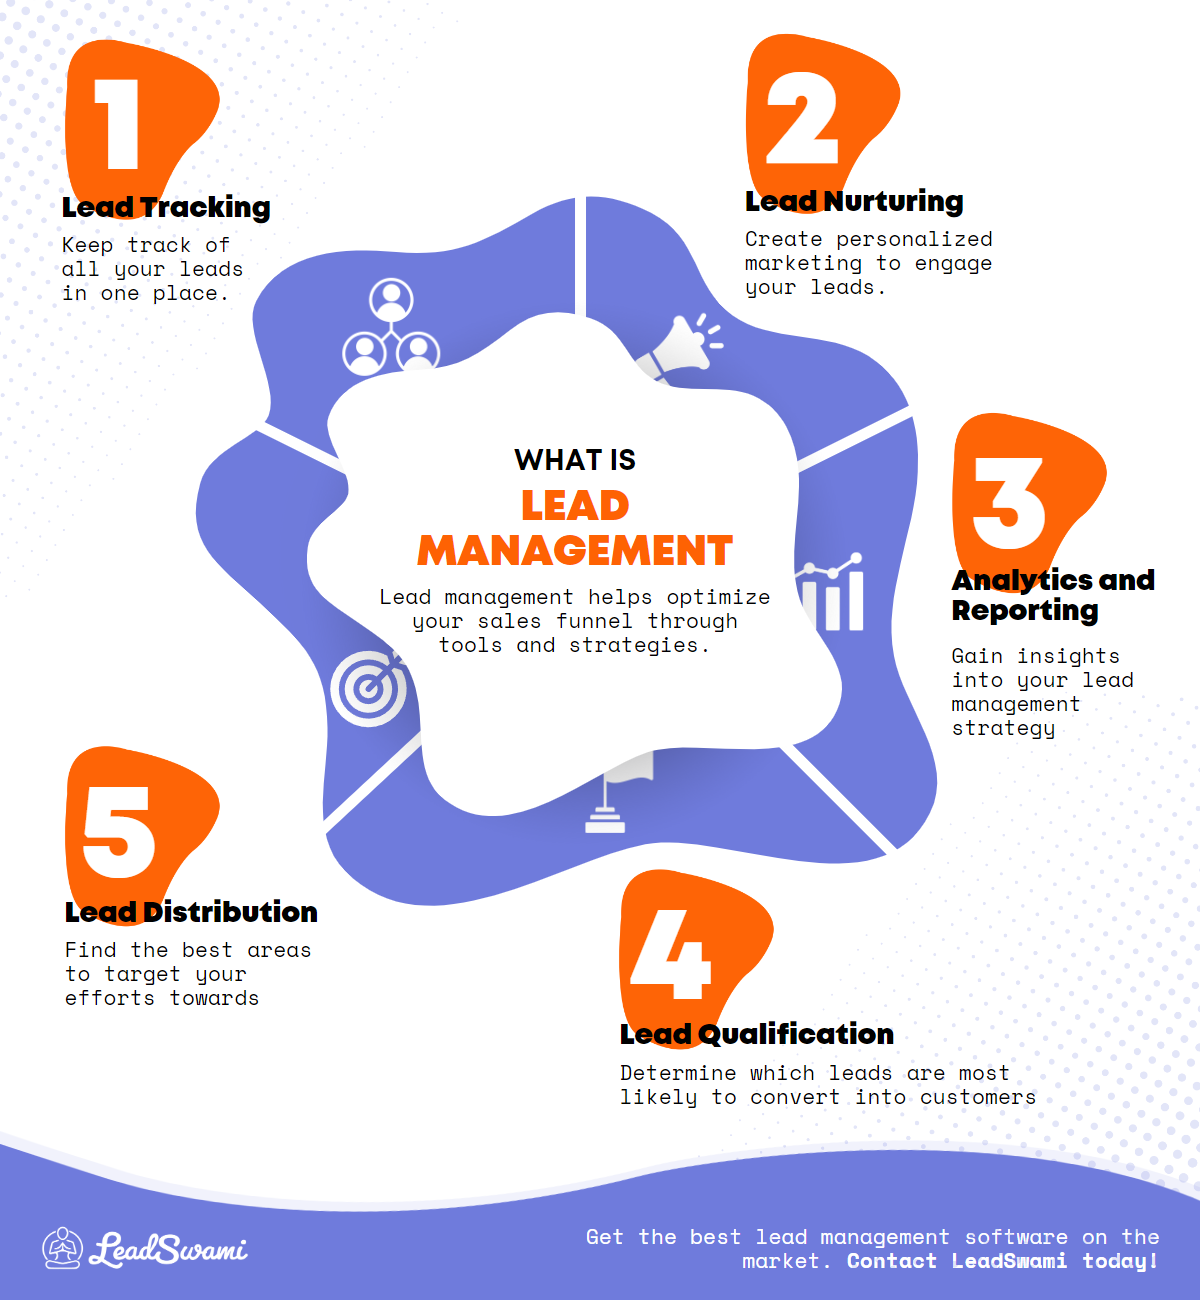 M37613 - LeadSwami - Infographic - What Is Lead Management.png